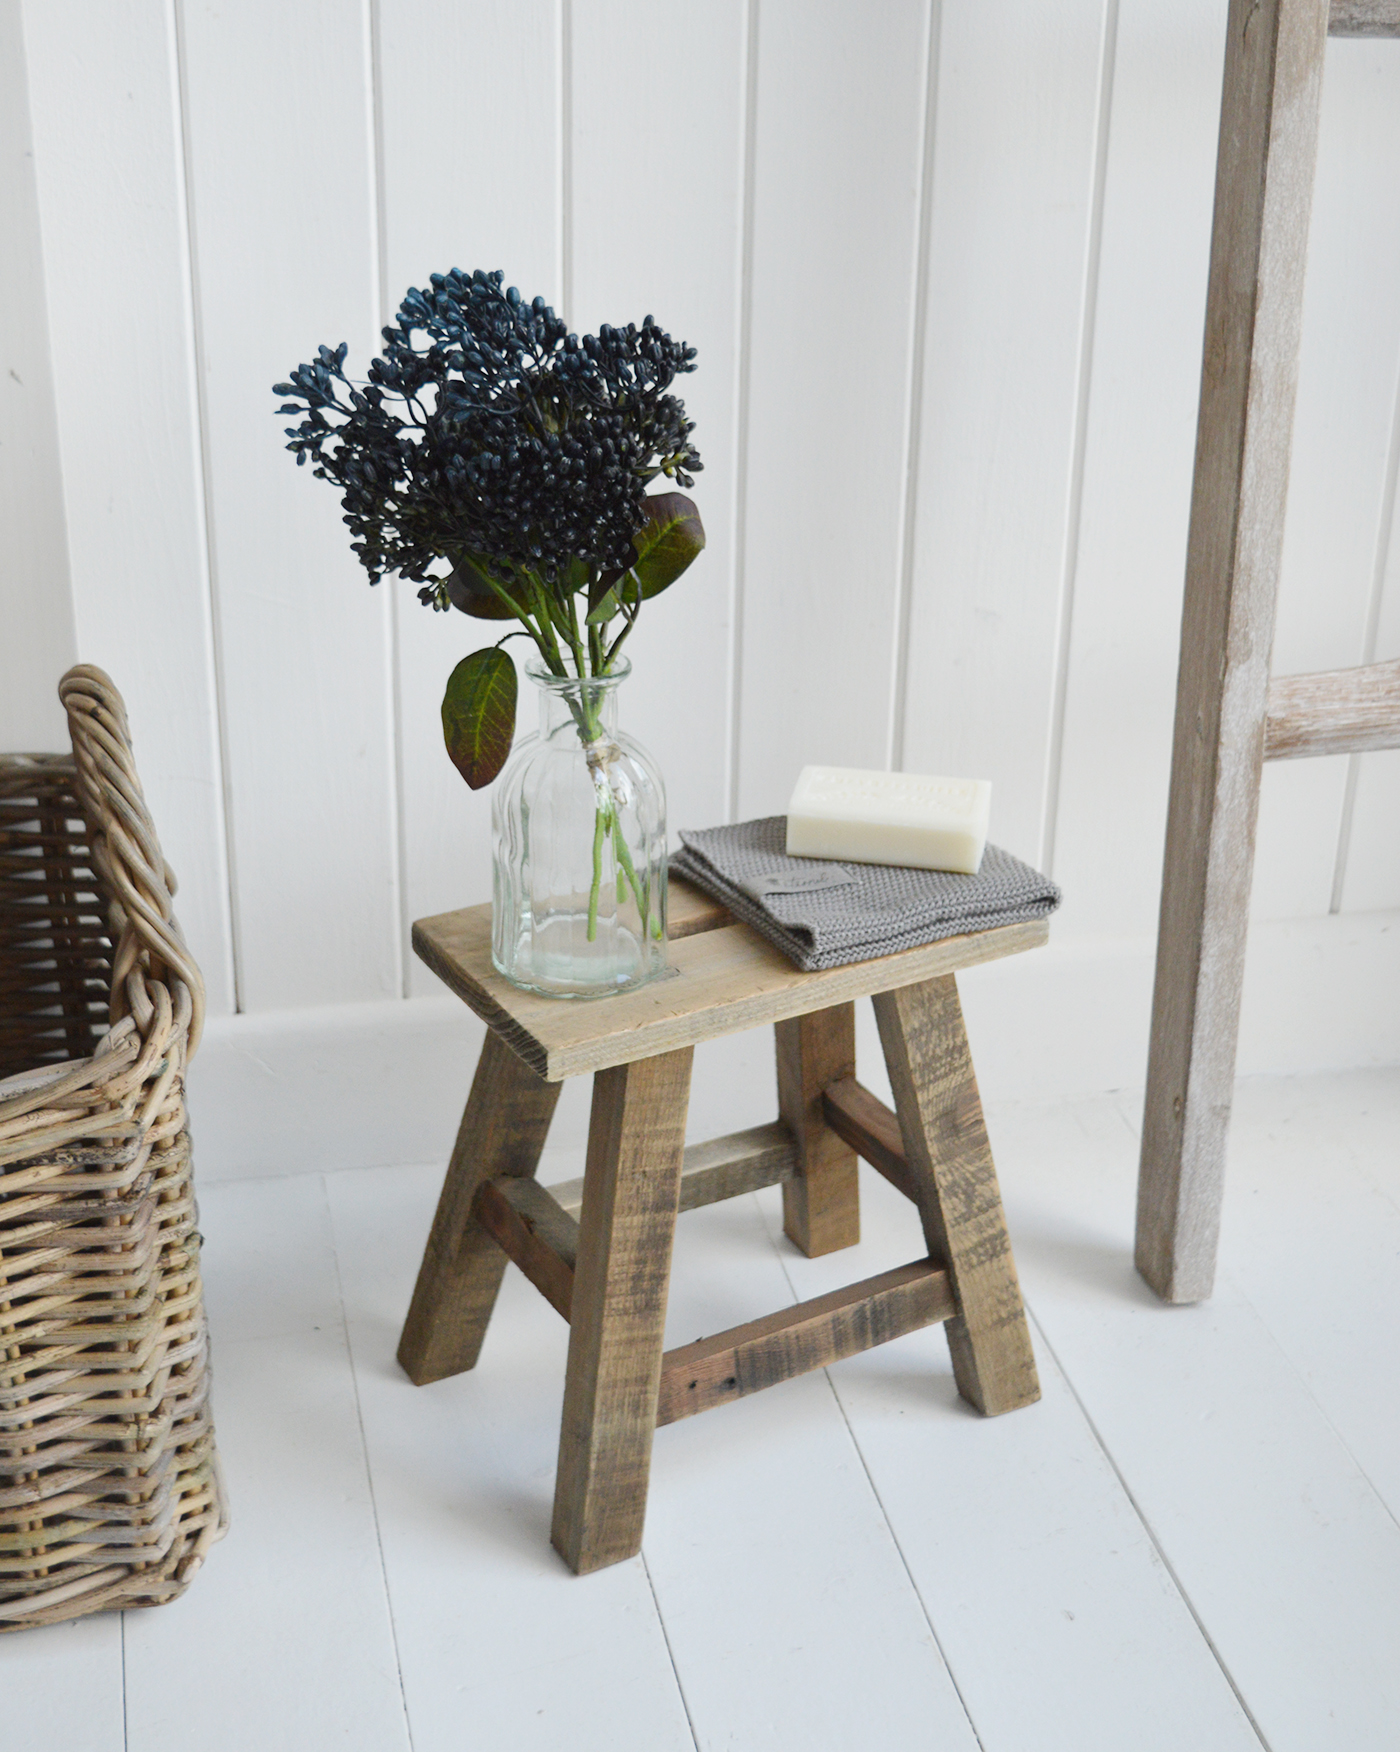 Our small Pawtucket rustic milking stool - New England Coastal and Country Home Interiors